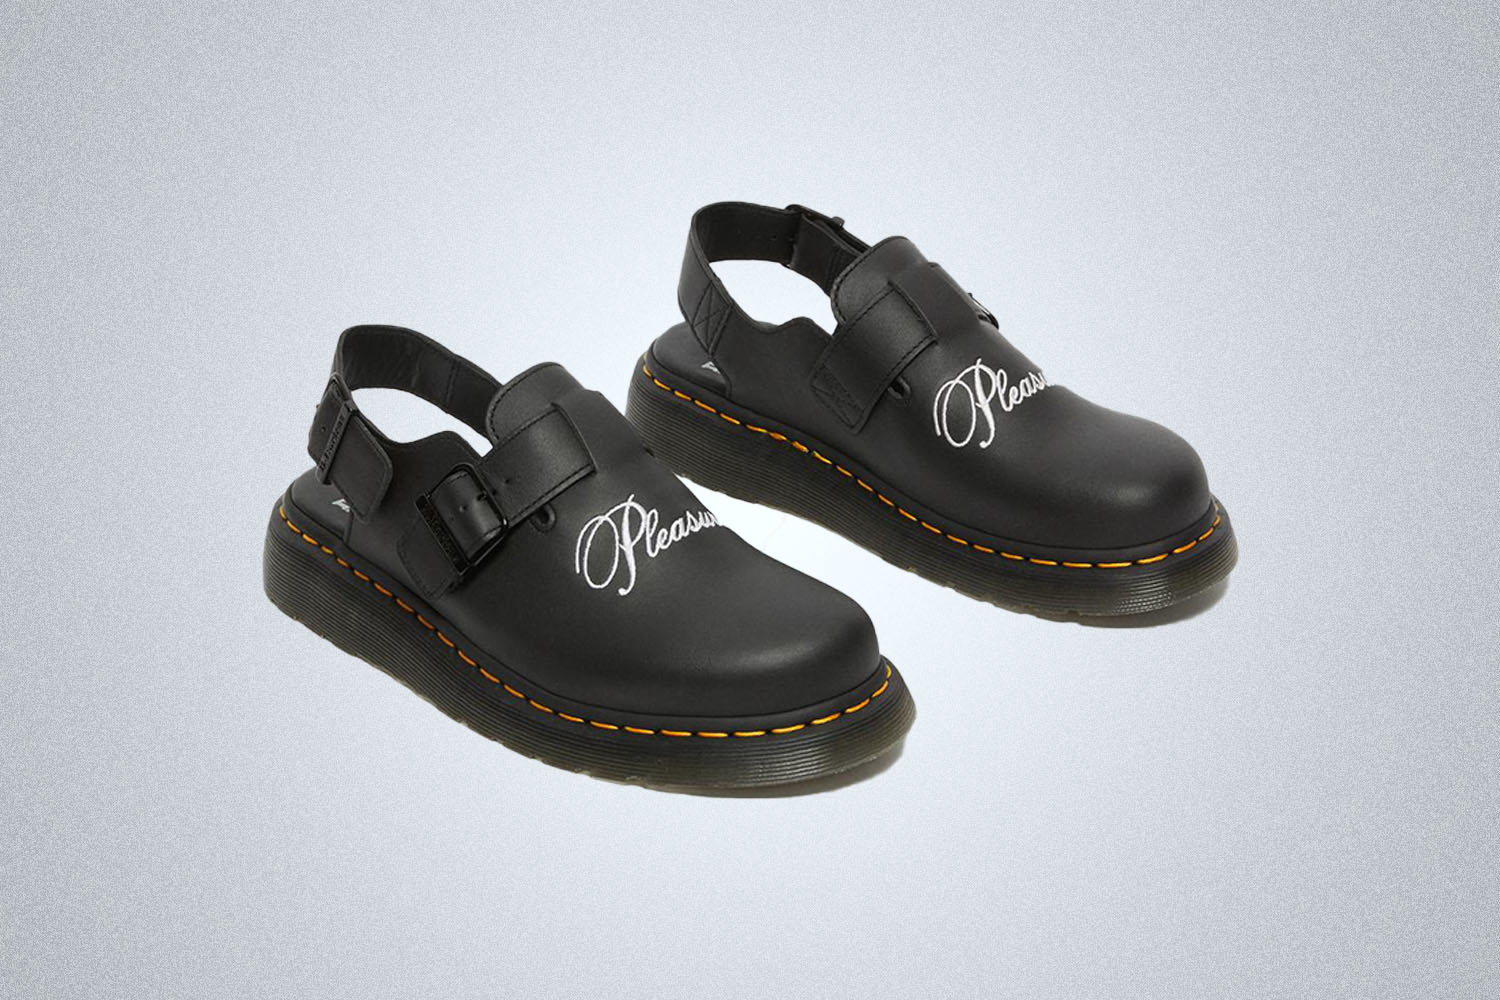 A pair of Dr. Martens x Pleasures mules on a gray background